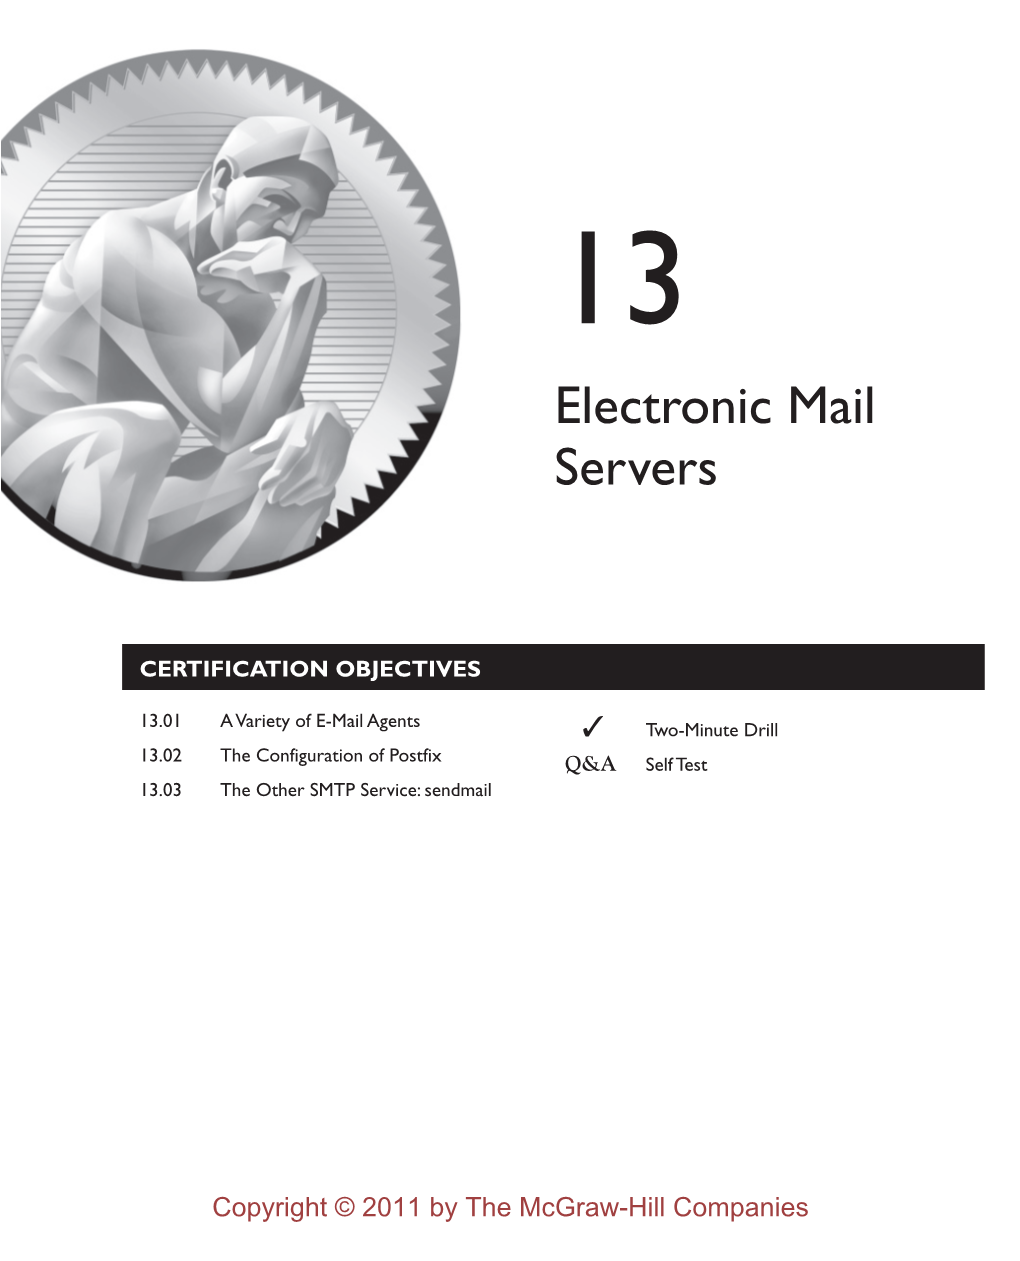 Electronic Mail Servers